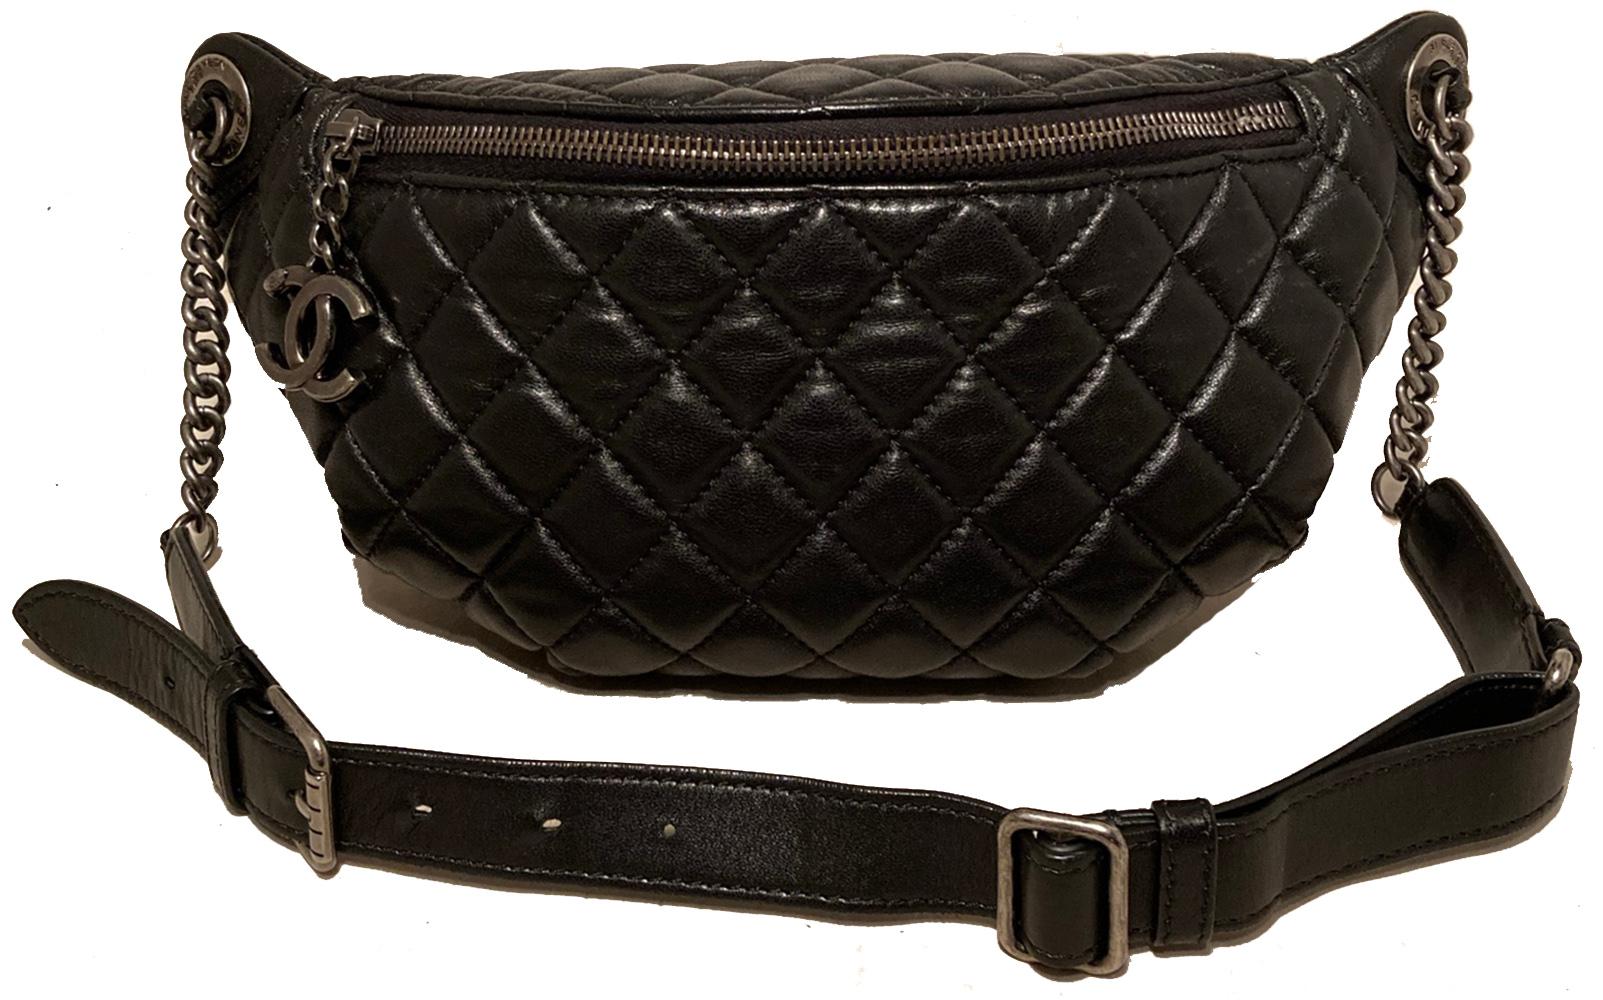 Chanel Quilted Black Leather Banane Fanny Pack Bum Bag in excellent like new condition. Black quilted lambskin exterior trimmed with ruthenium hardware. Thick chain and leather strap buckle can easily be worn at a variety of lengths to suit waist,